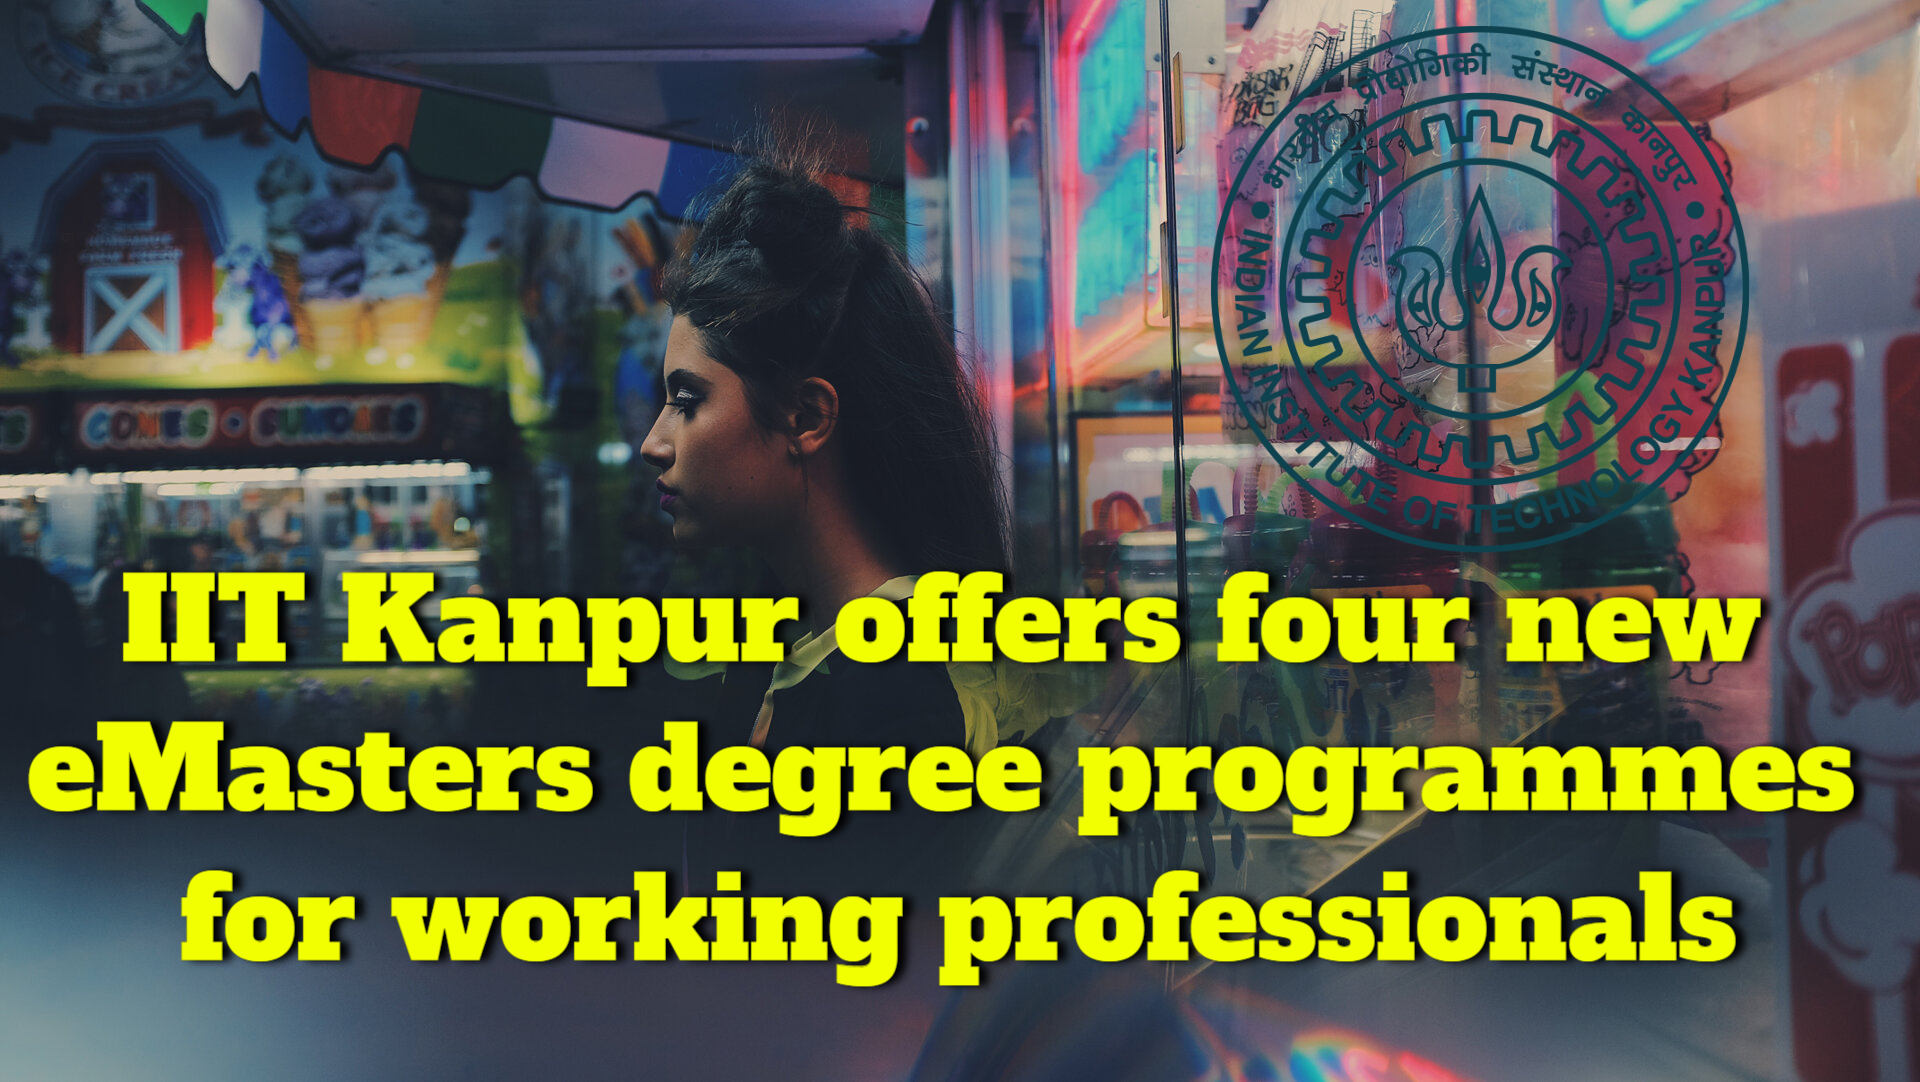 Four new eMasters degree programmes are now available at IIT Kanpur for working professionals